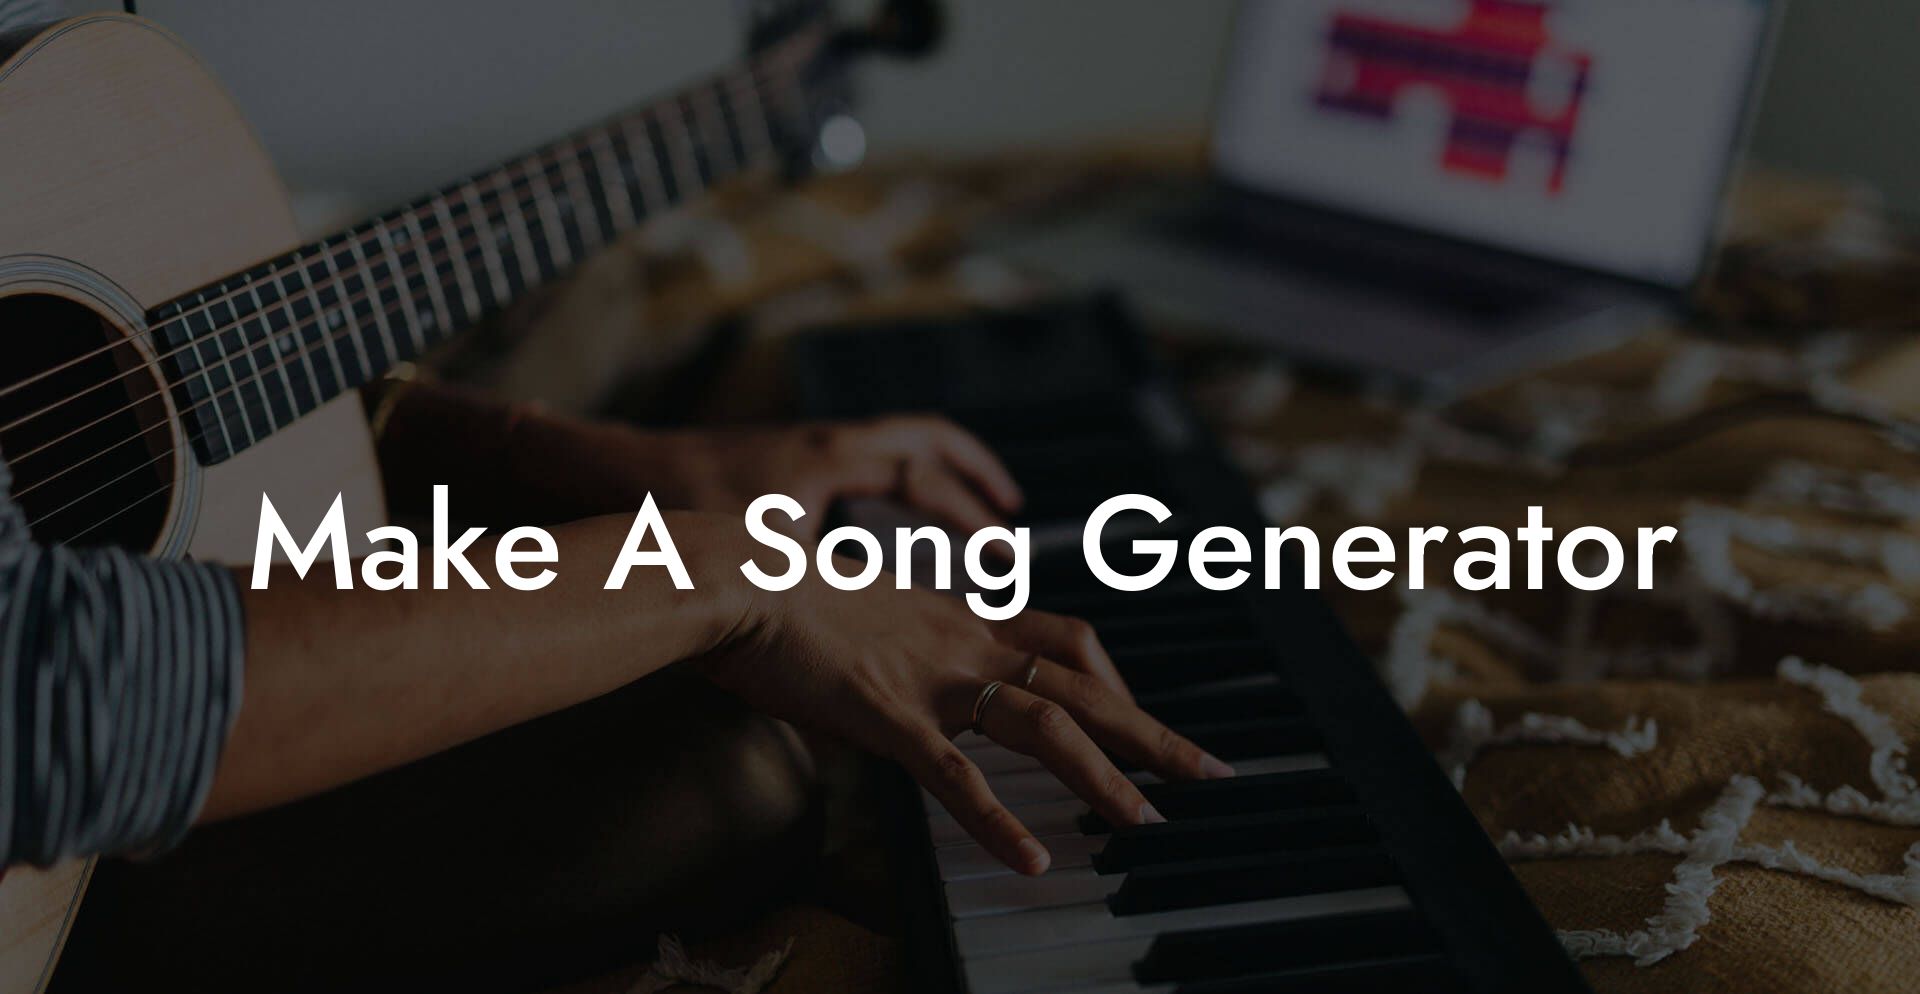 make a song generator lyric assistant